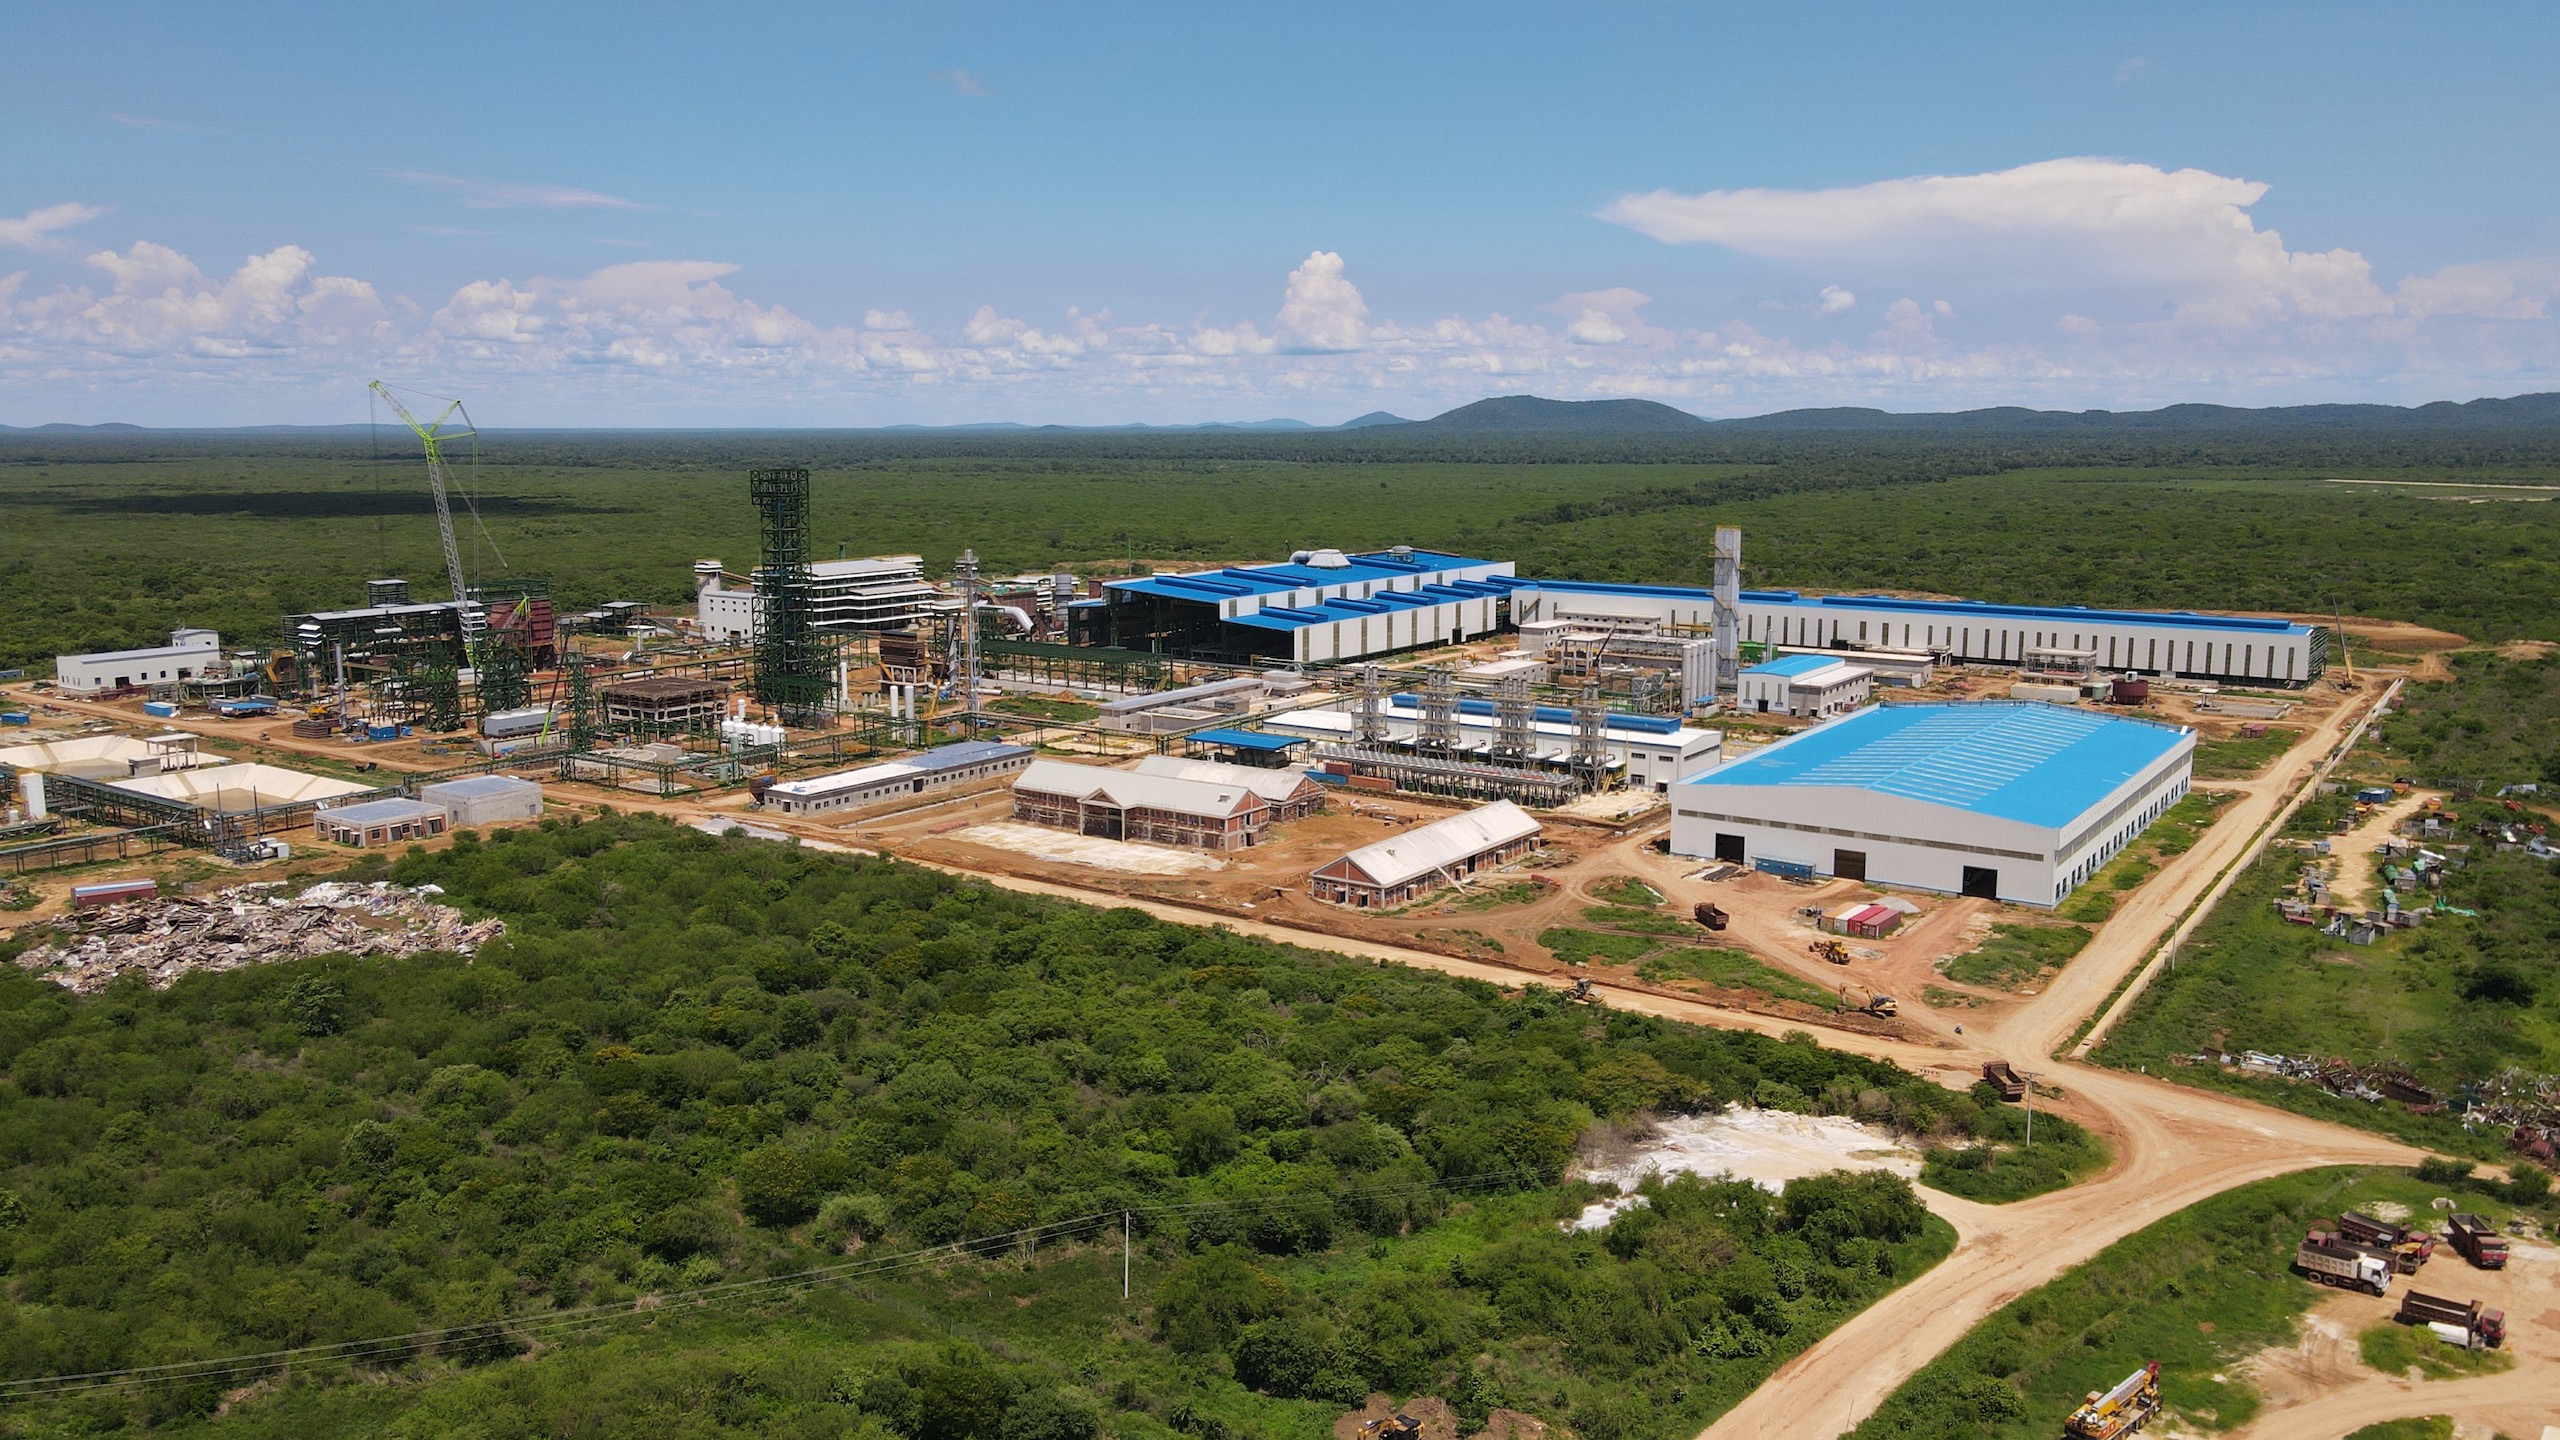 <p>Construction of the Mutún steel complex in eastern Bolivia. For six decades, the country has targeted a steel industry to make use of the area’s 40 billion tonne iron ore reserves. (Image: La Región)</p>